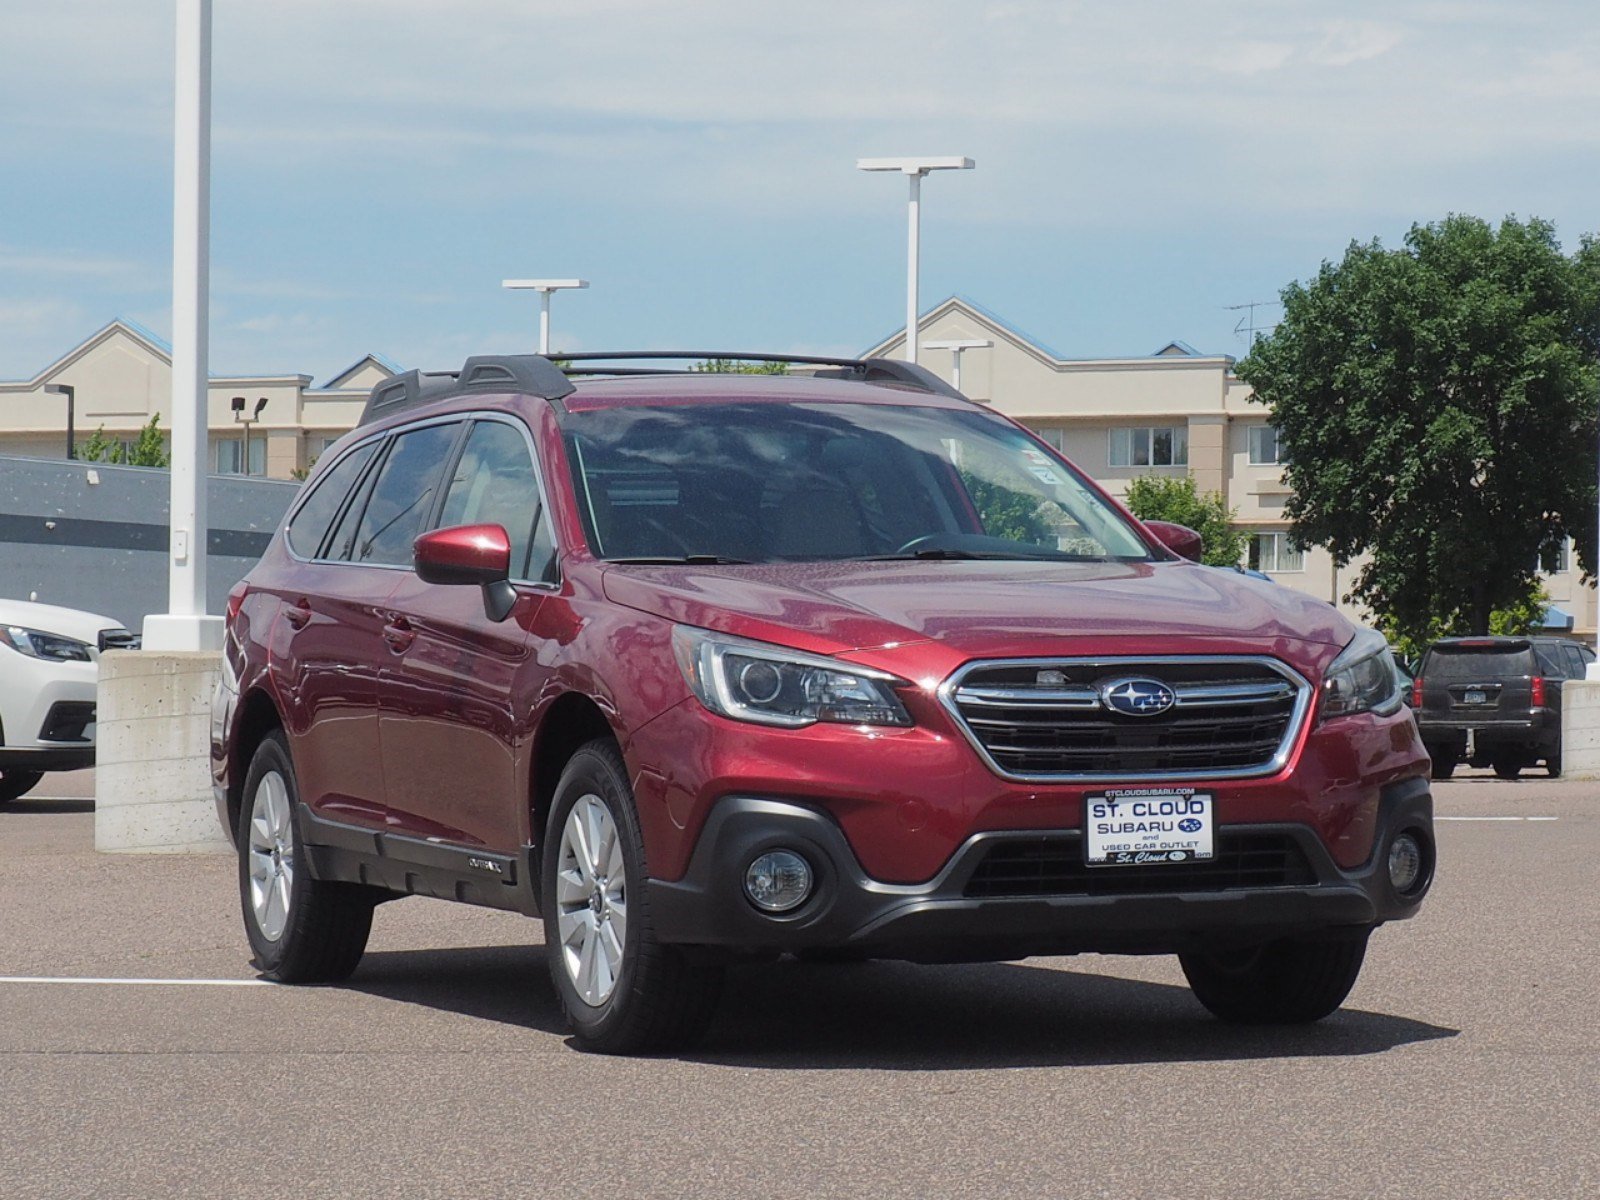 Used 2018 Subaru Outback Premium with VIN 4S4BSACC6J3251616 for sale in Saint Cloud, Minnesota